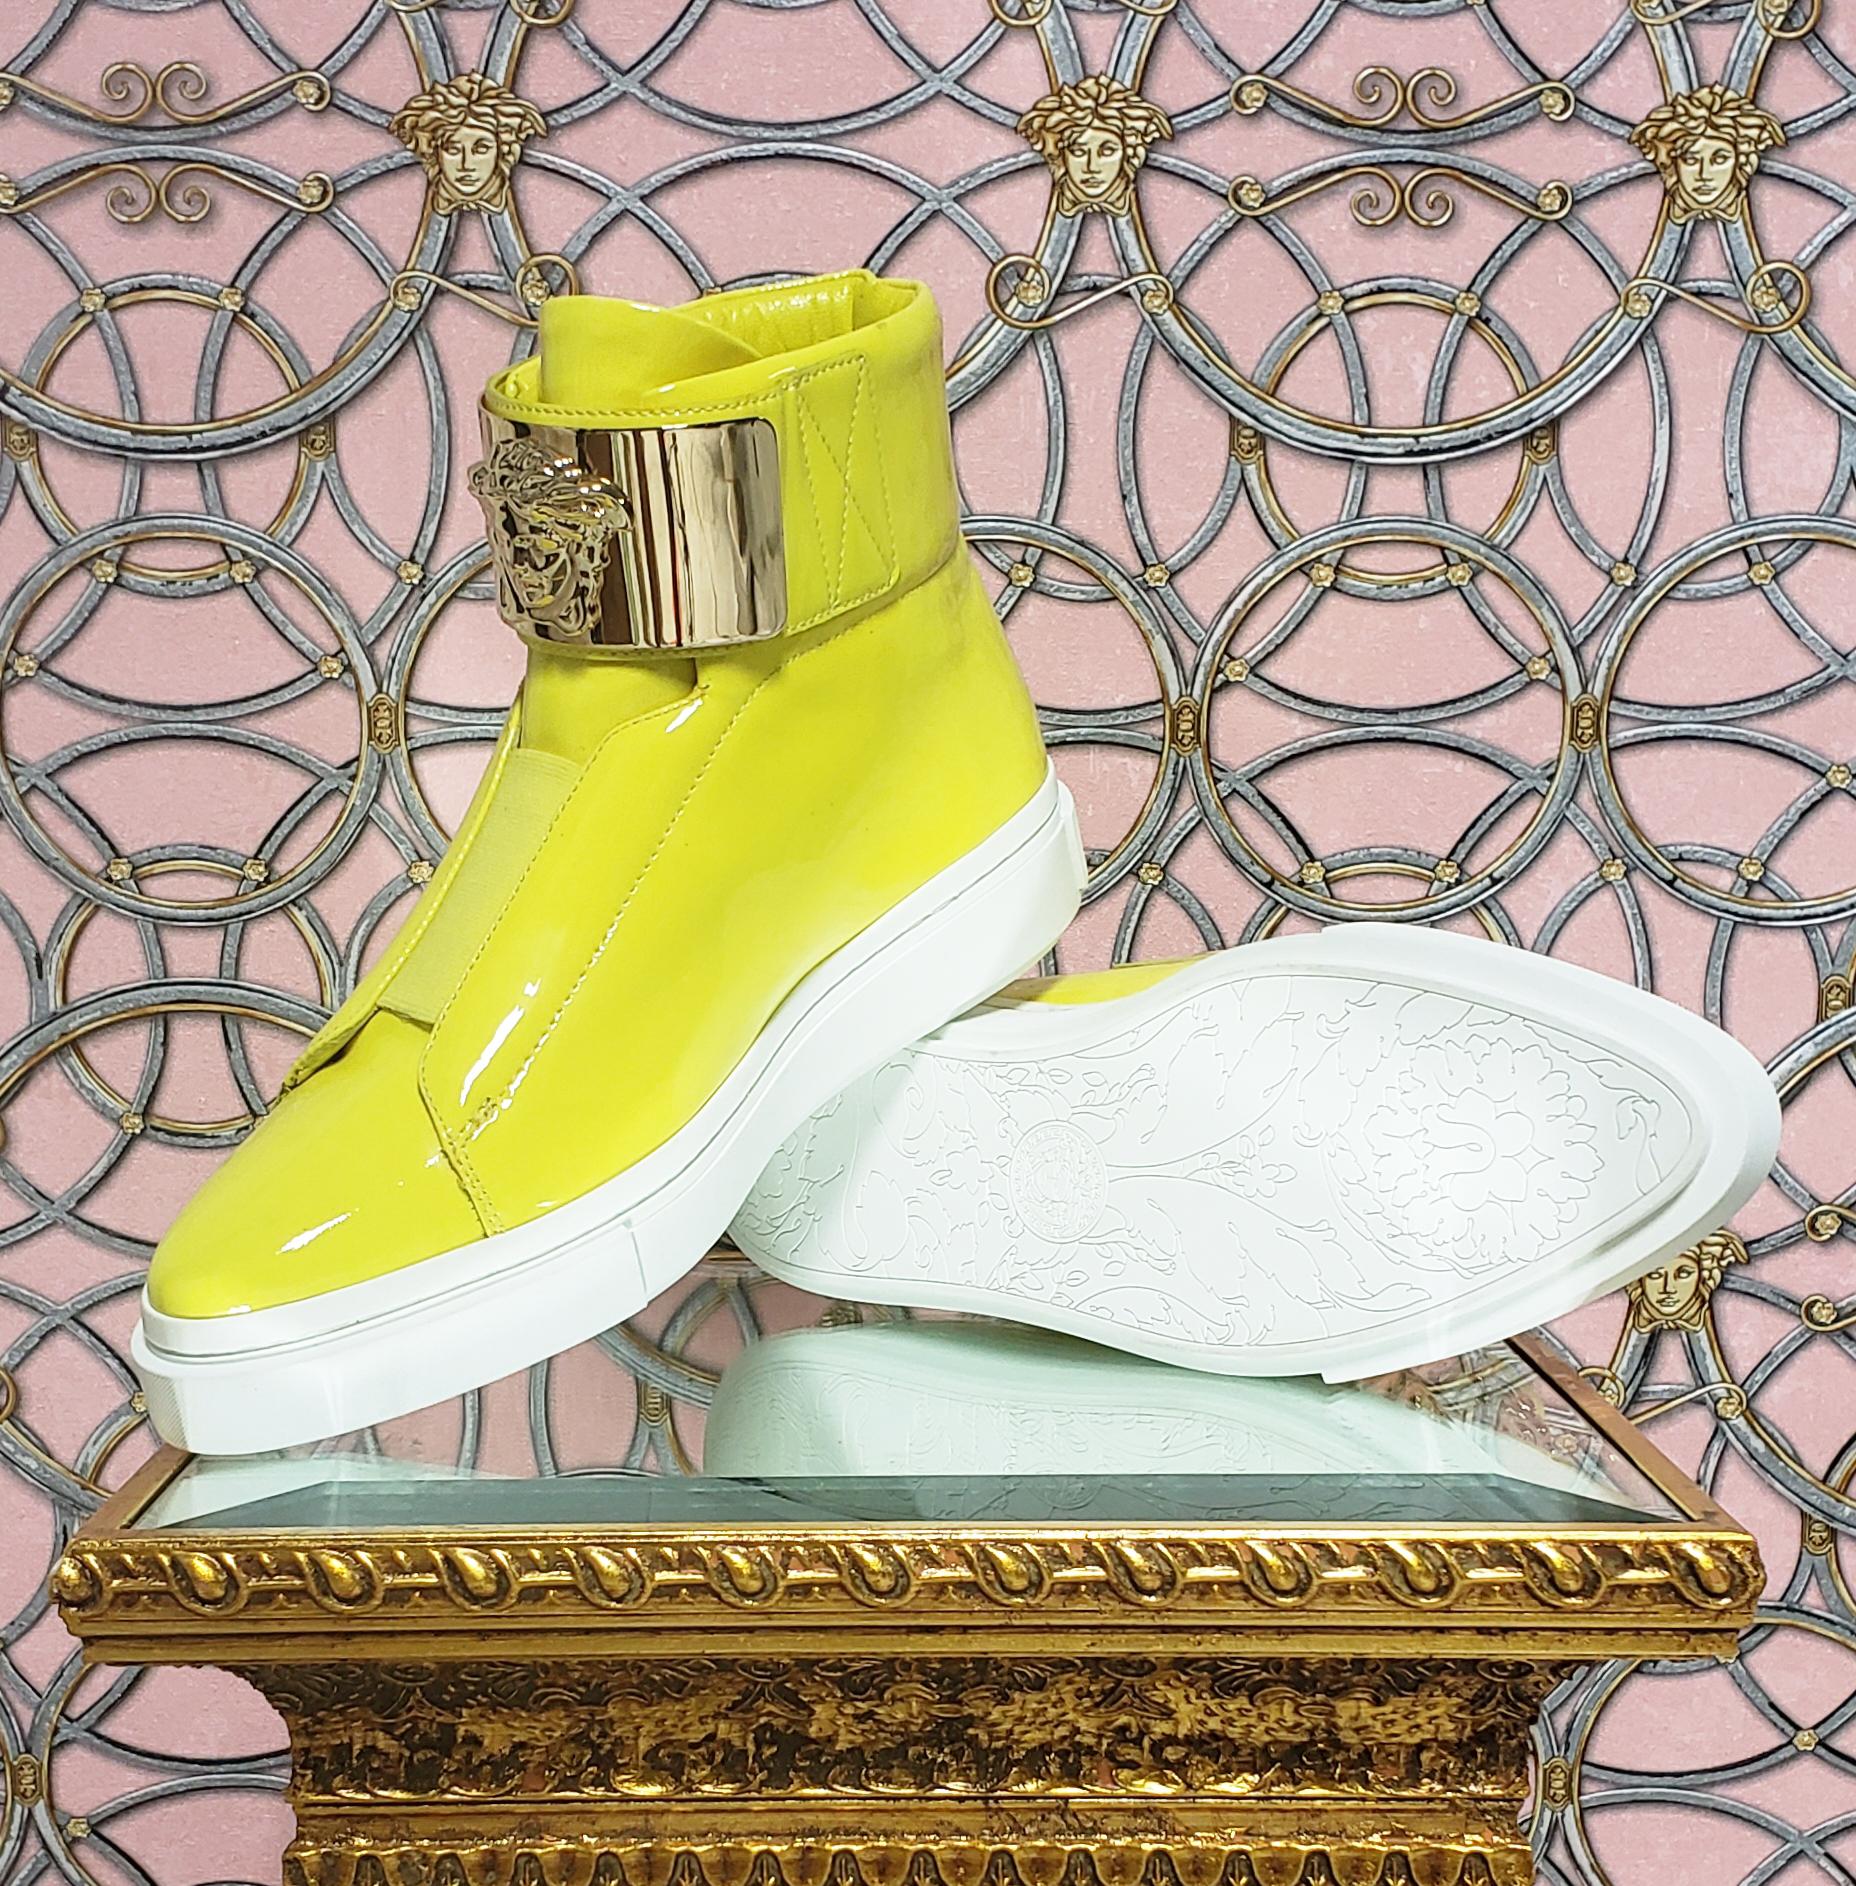 VERSACE
 
Medusa Bar Hi Top Sneakers

Gold Medusa hardware

white rubber sole 

leather sole 

Content: 100% patent leather

Size 37.5 - US 7.5

insole 9 1/2

Made in Italy


Brand new! Has a little marks on patent leather. Invisible from distance.